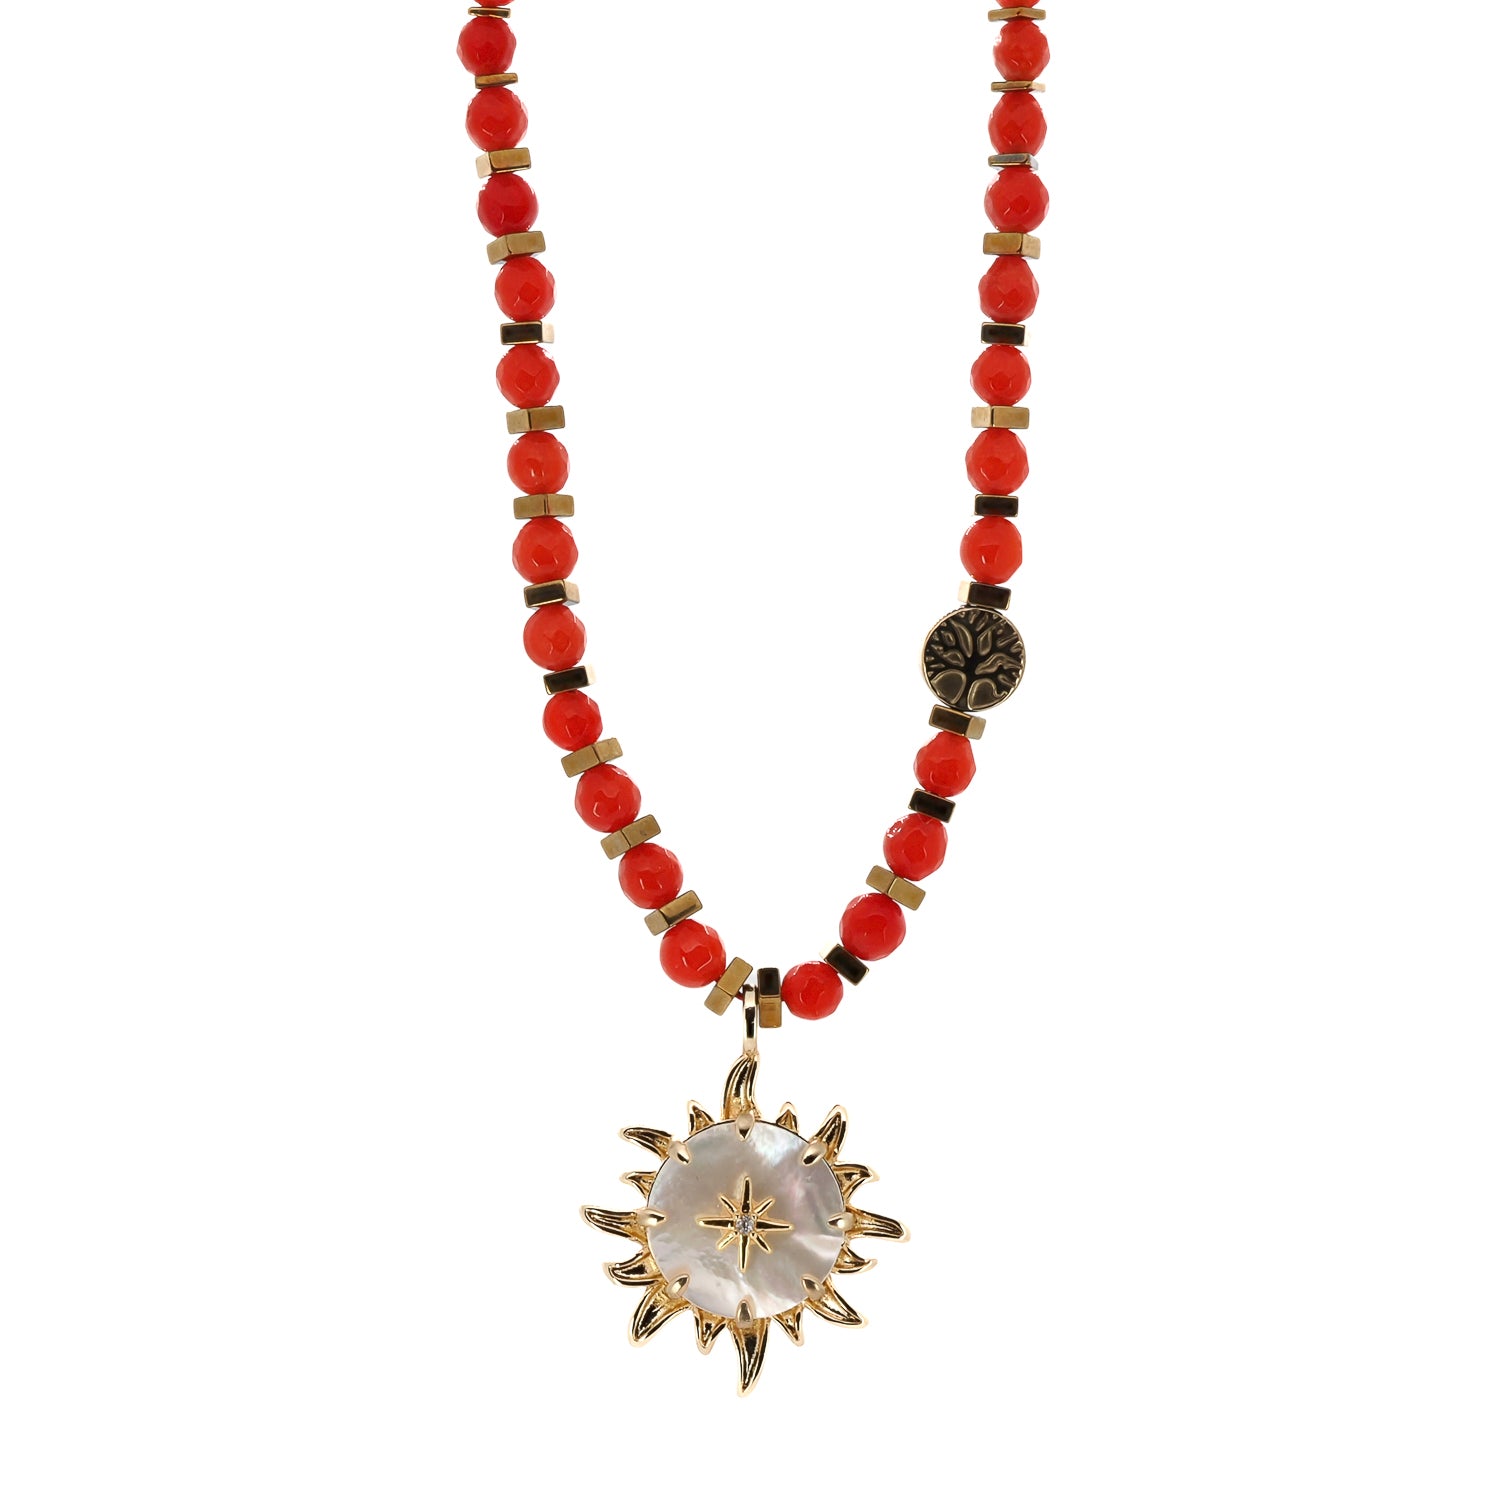 Handcrafted Carnelian Stone Necklace